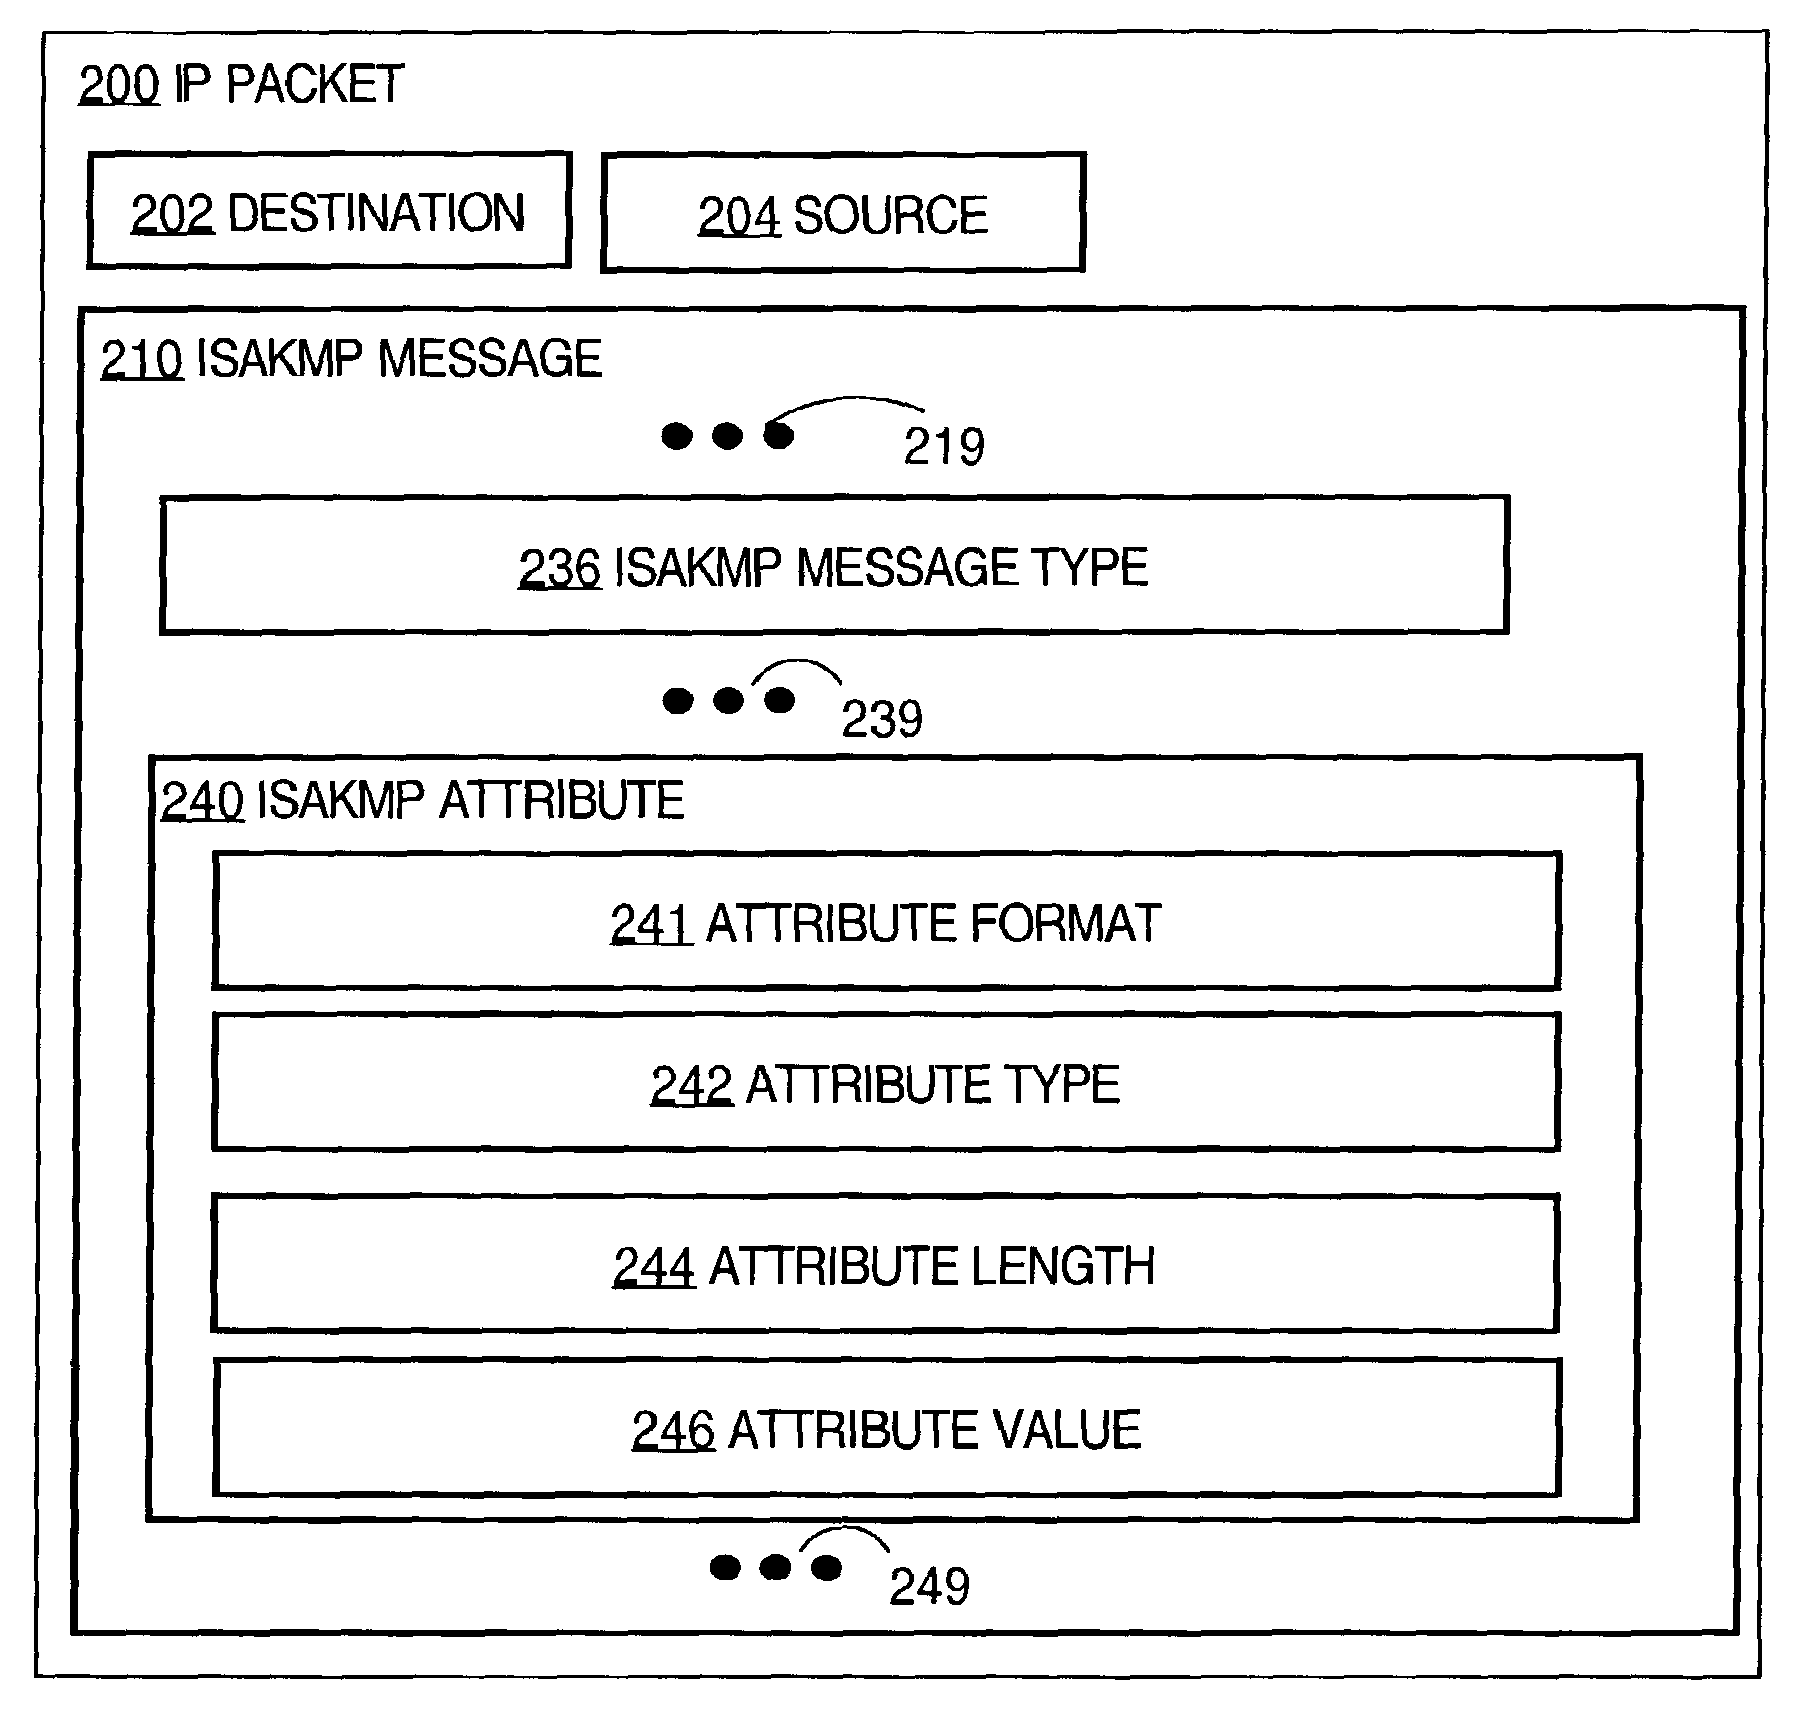 Method and apparatus for passing security configuration information between a client and a security policy server